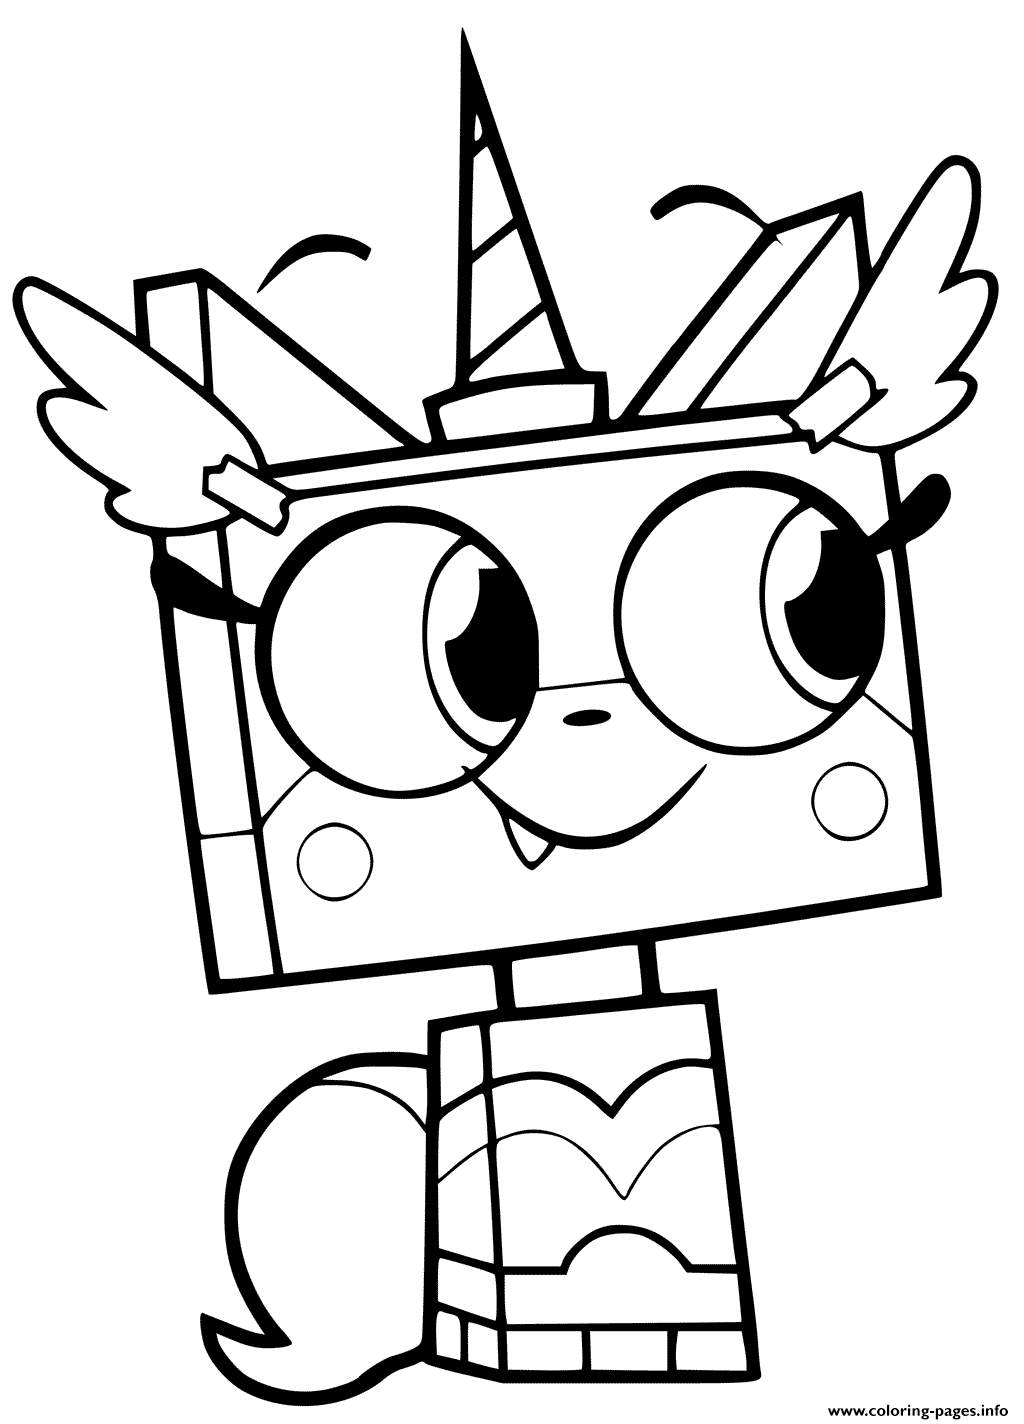 Unikitty In Wonder Woman Costume coloring pages